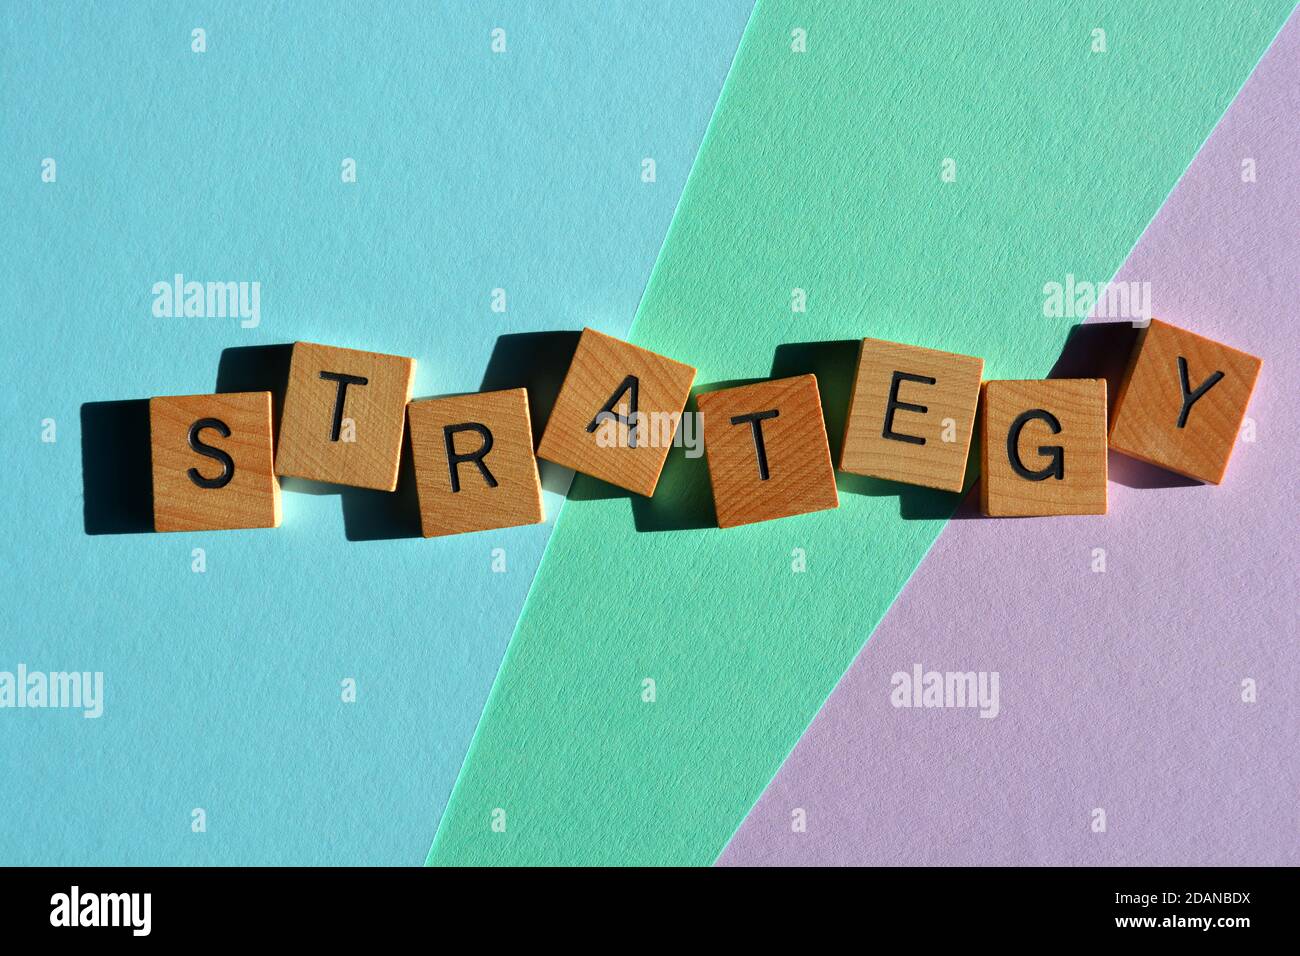 Strategy, word in wooden alphabet letters isolated on a pastel colored background Stock Photo